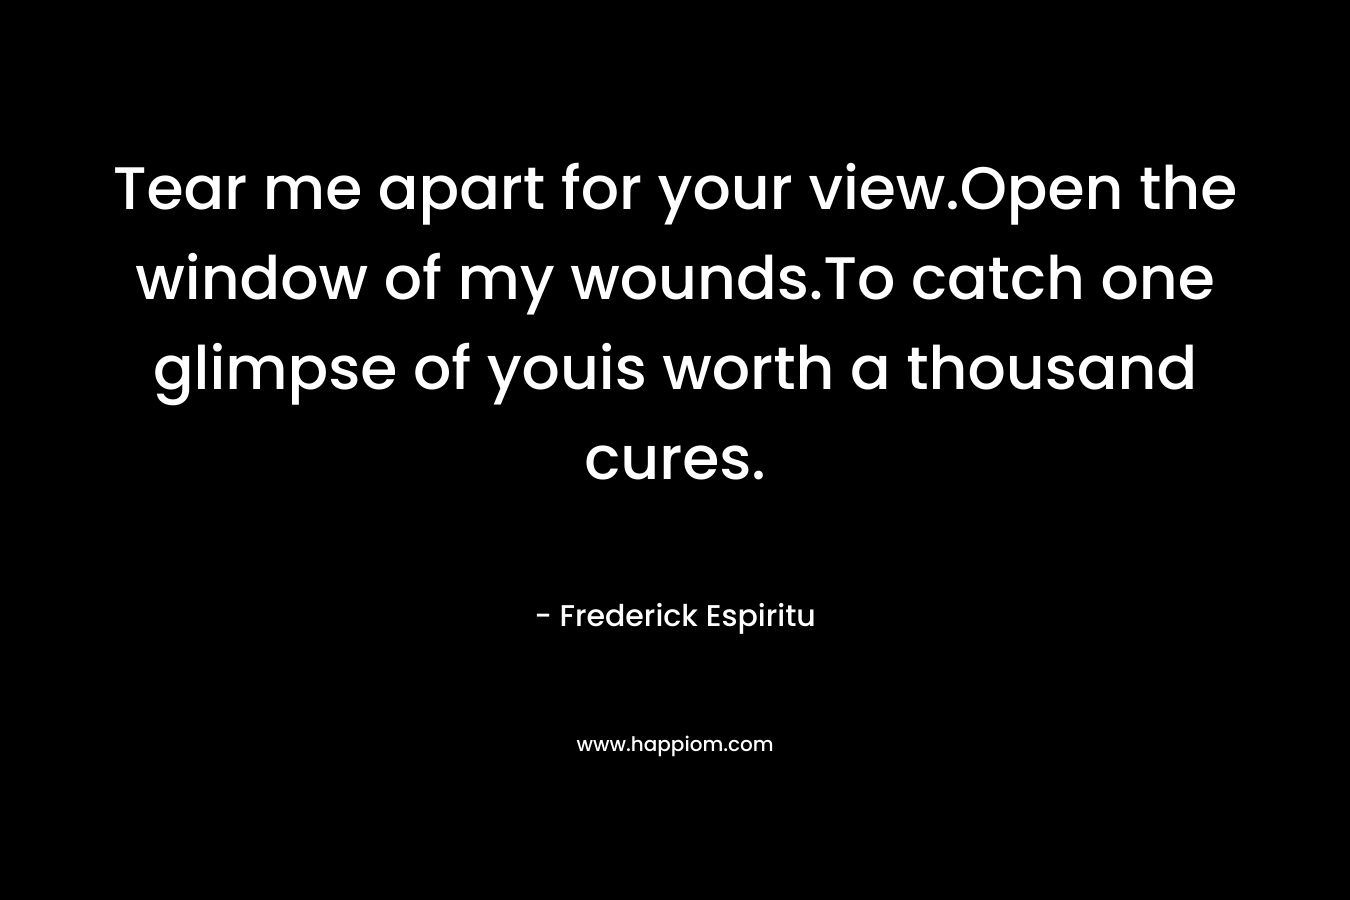 Tear me apart for your view.Open the window of my wounds.To catch one glimpse of youis worth a thousand cures. – Frederick Espiritu